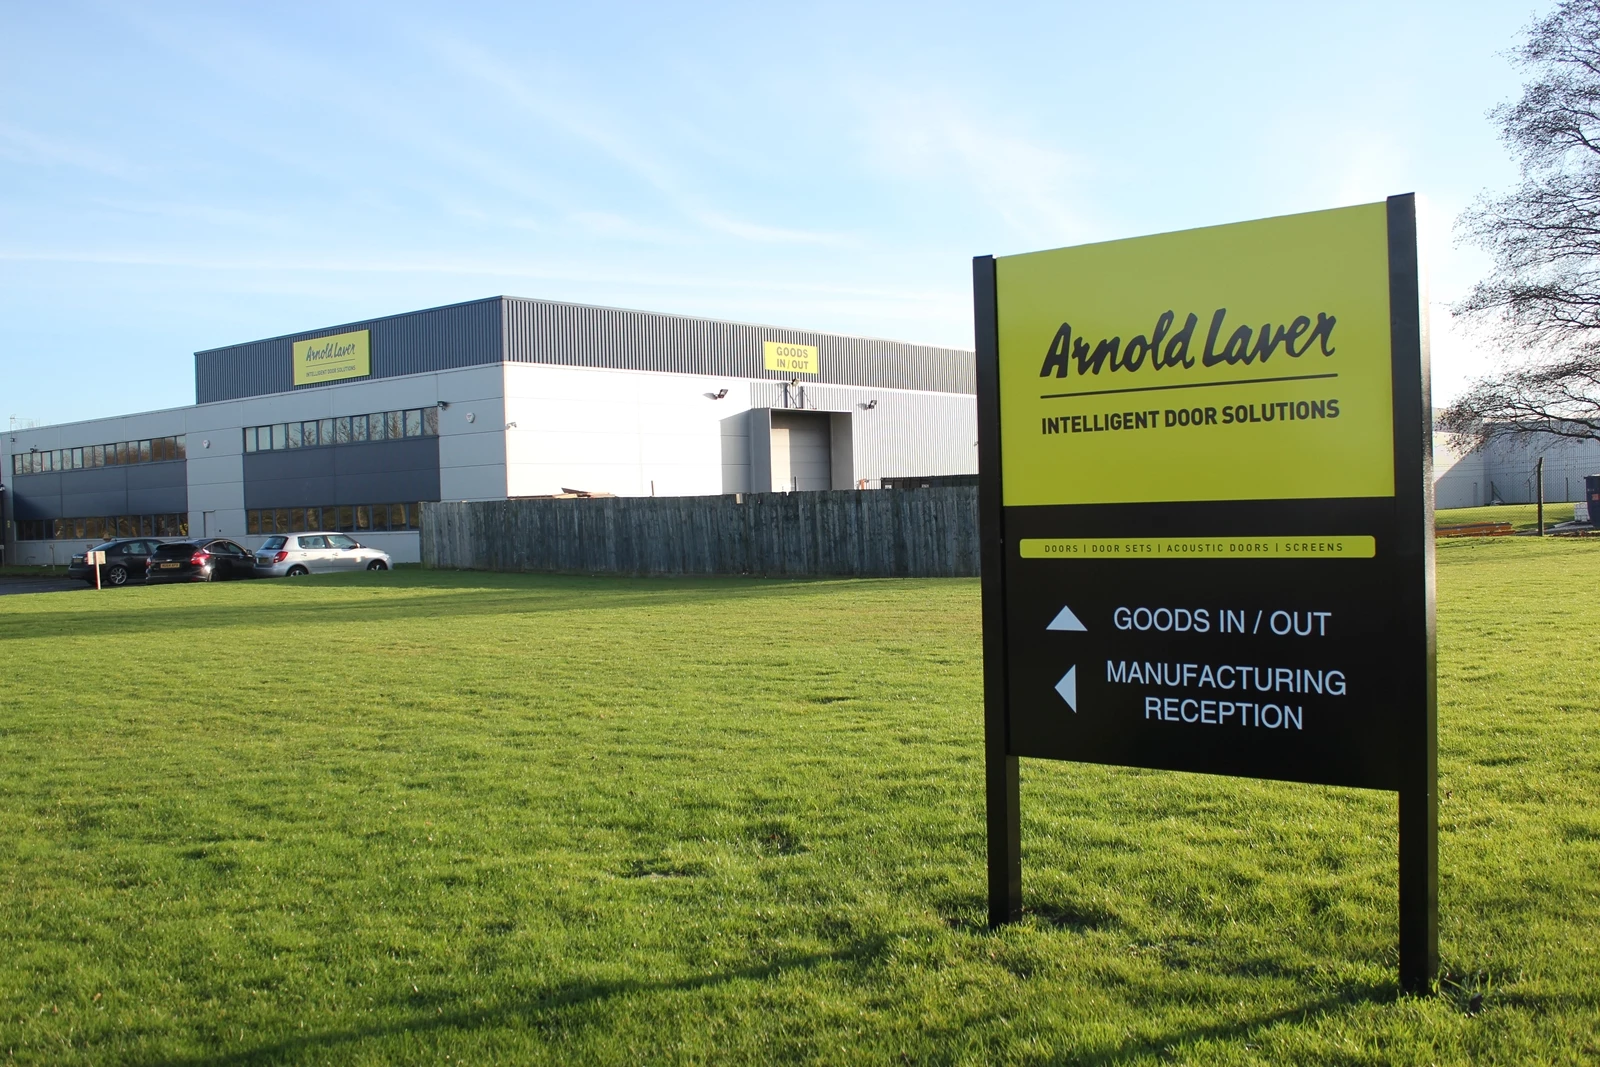 Arnold Laver at Thornaby